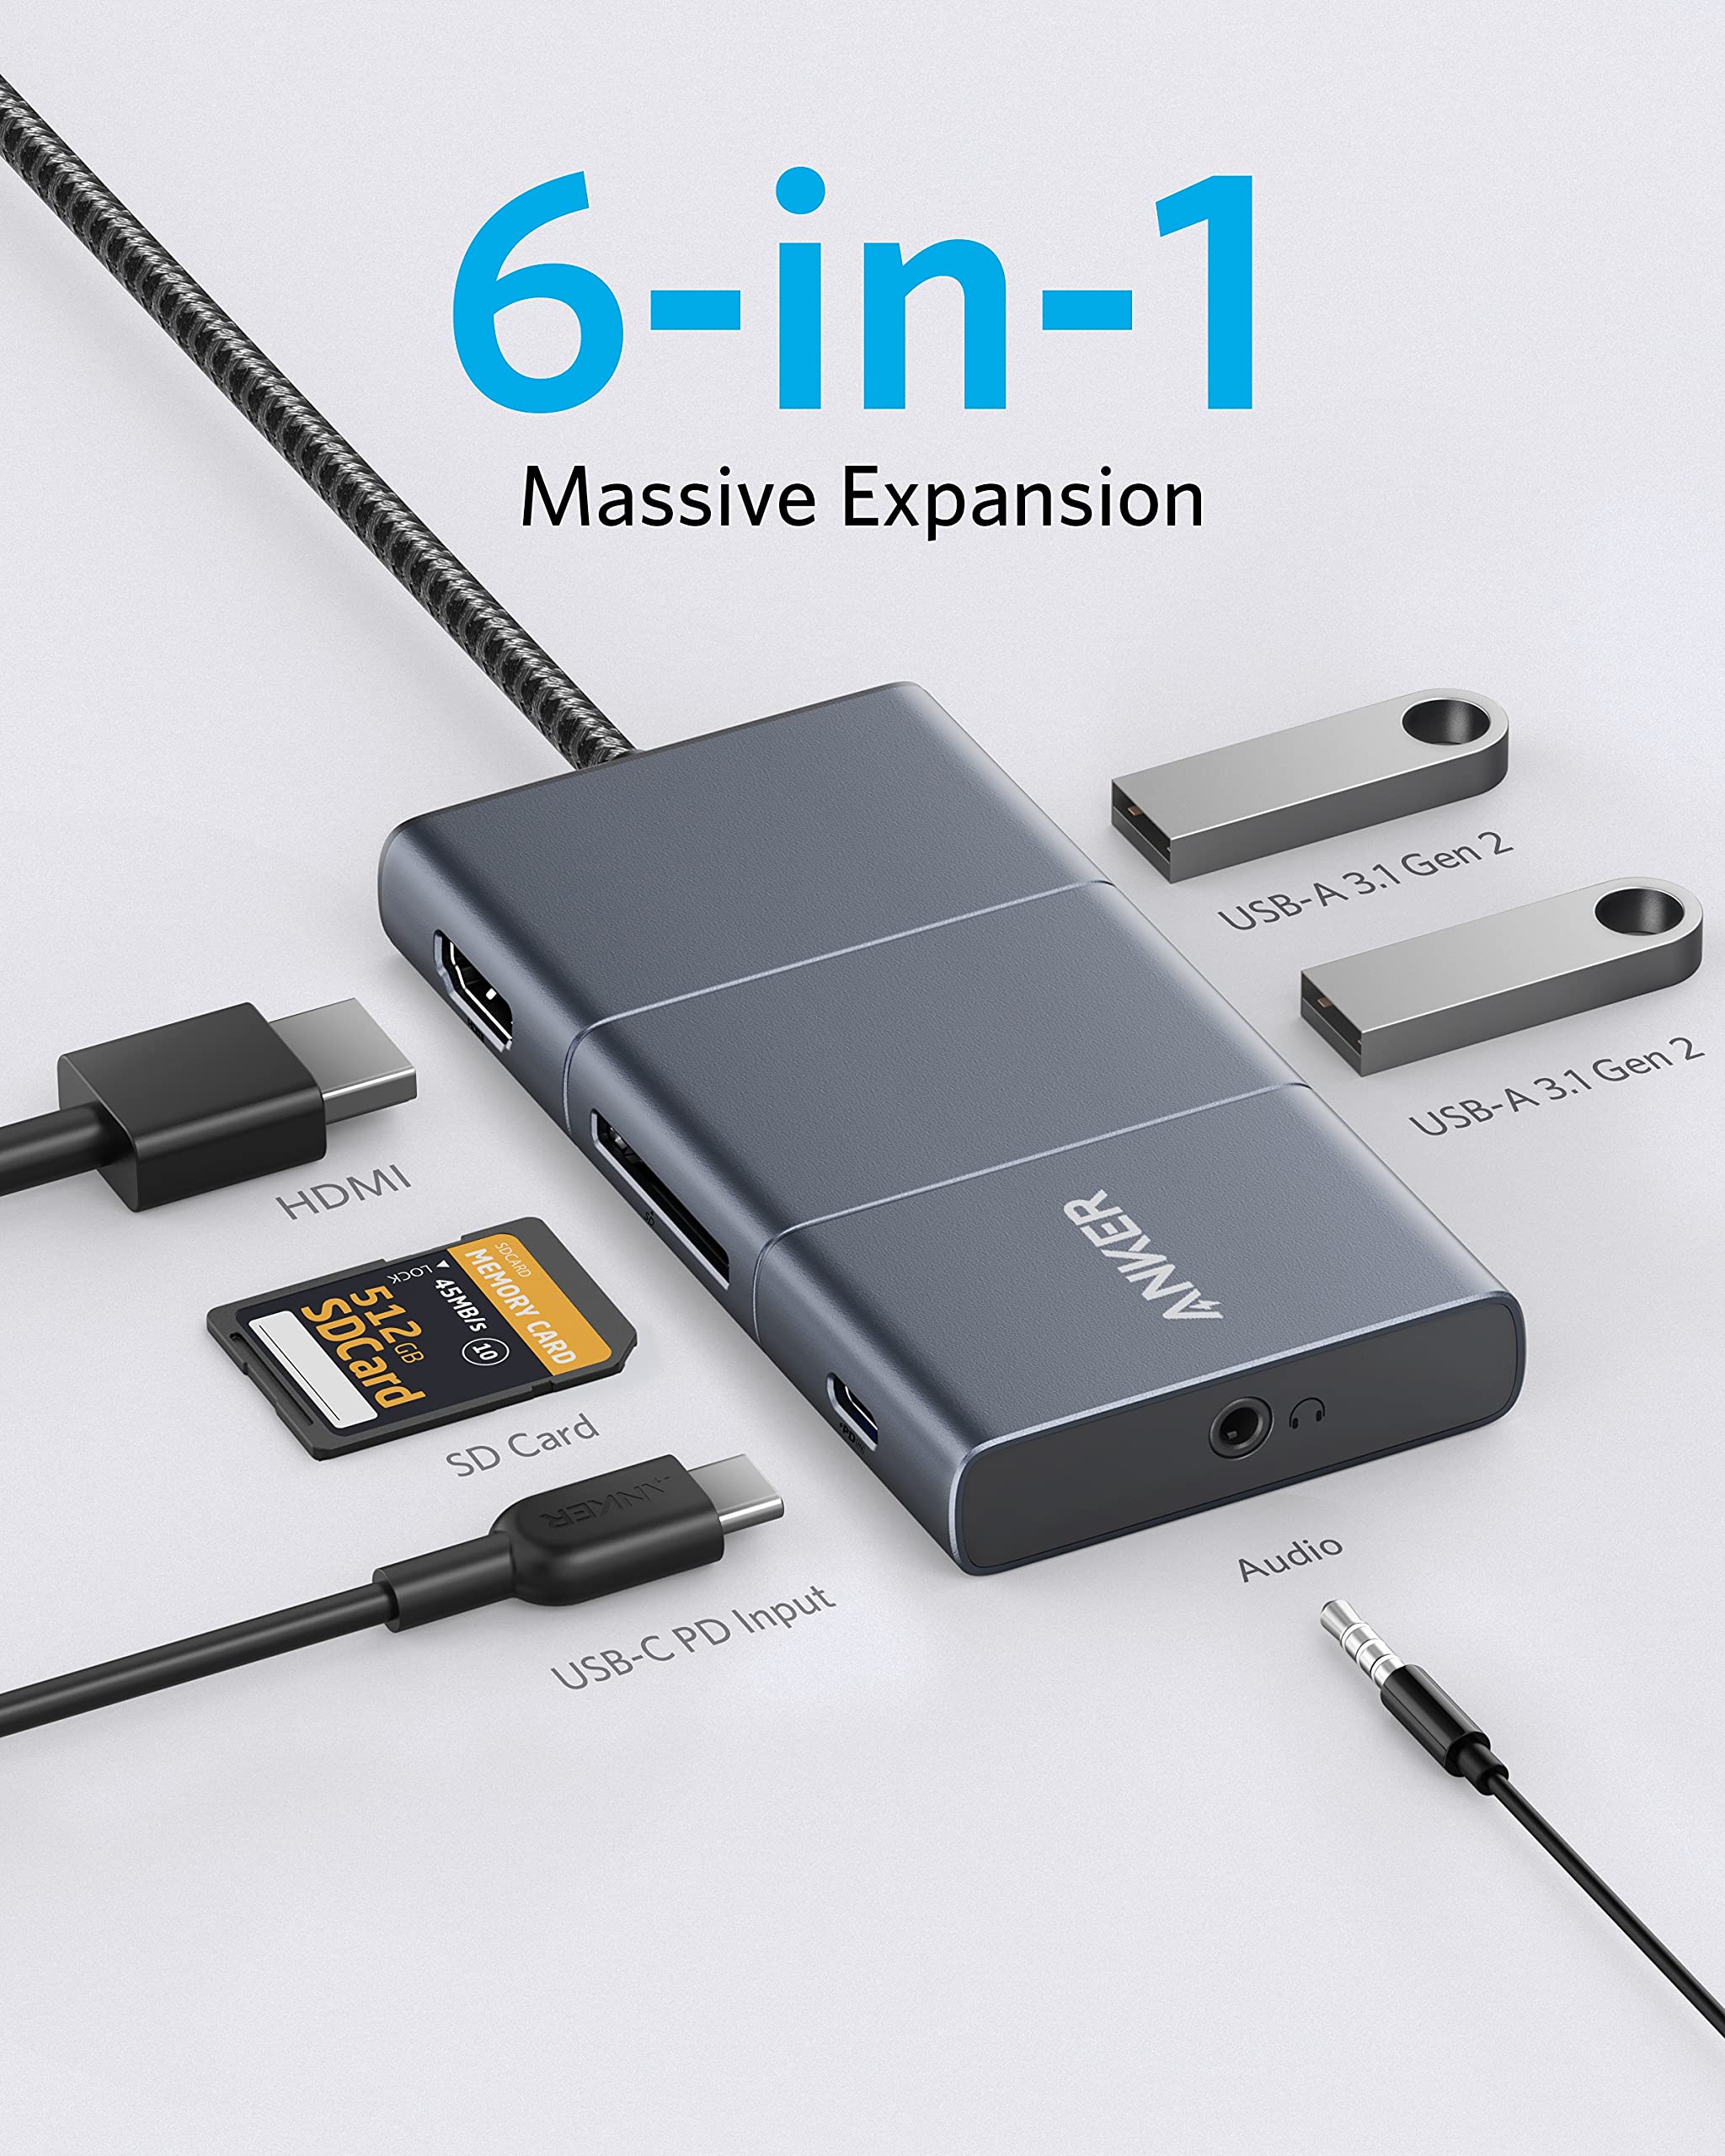 Anker USB C Hub, PowerExpand 6-in-1 USB-C Adapter, with 4K HDMI, 100W Power Delivery USB C Port, 2 10 Gbps USB A Ports, SD Card Reader, and 3.5mm Audio, for MacBook Air, MacBook Pro, XPS, and More